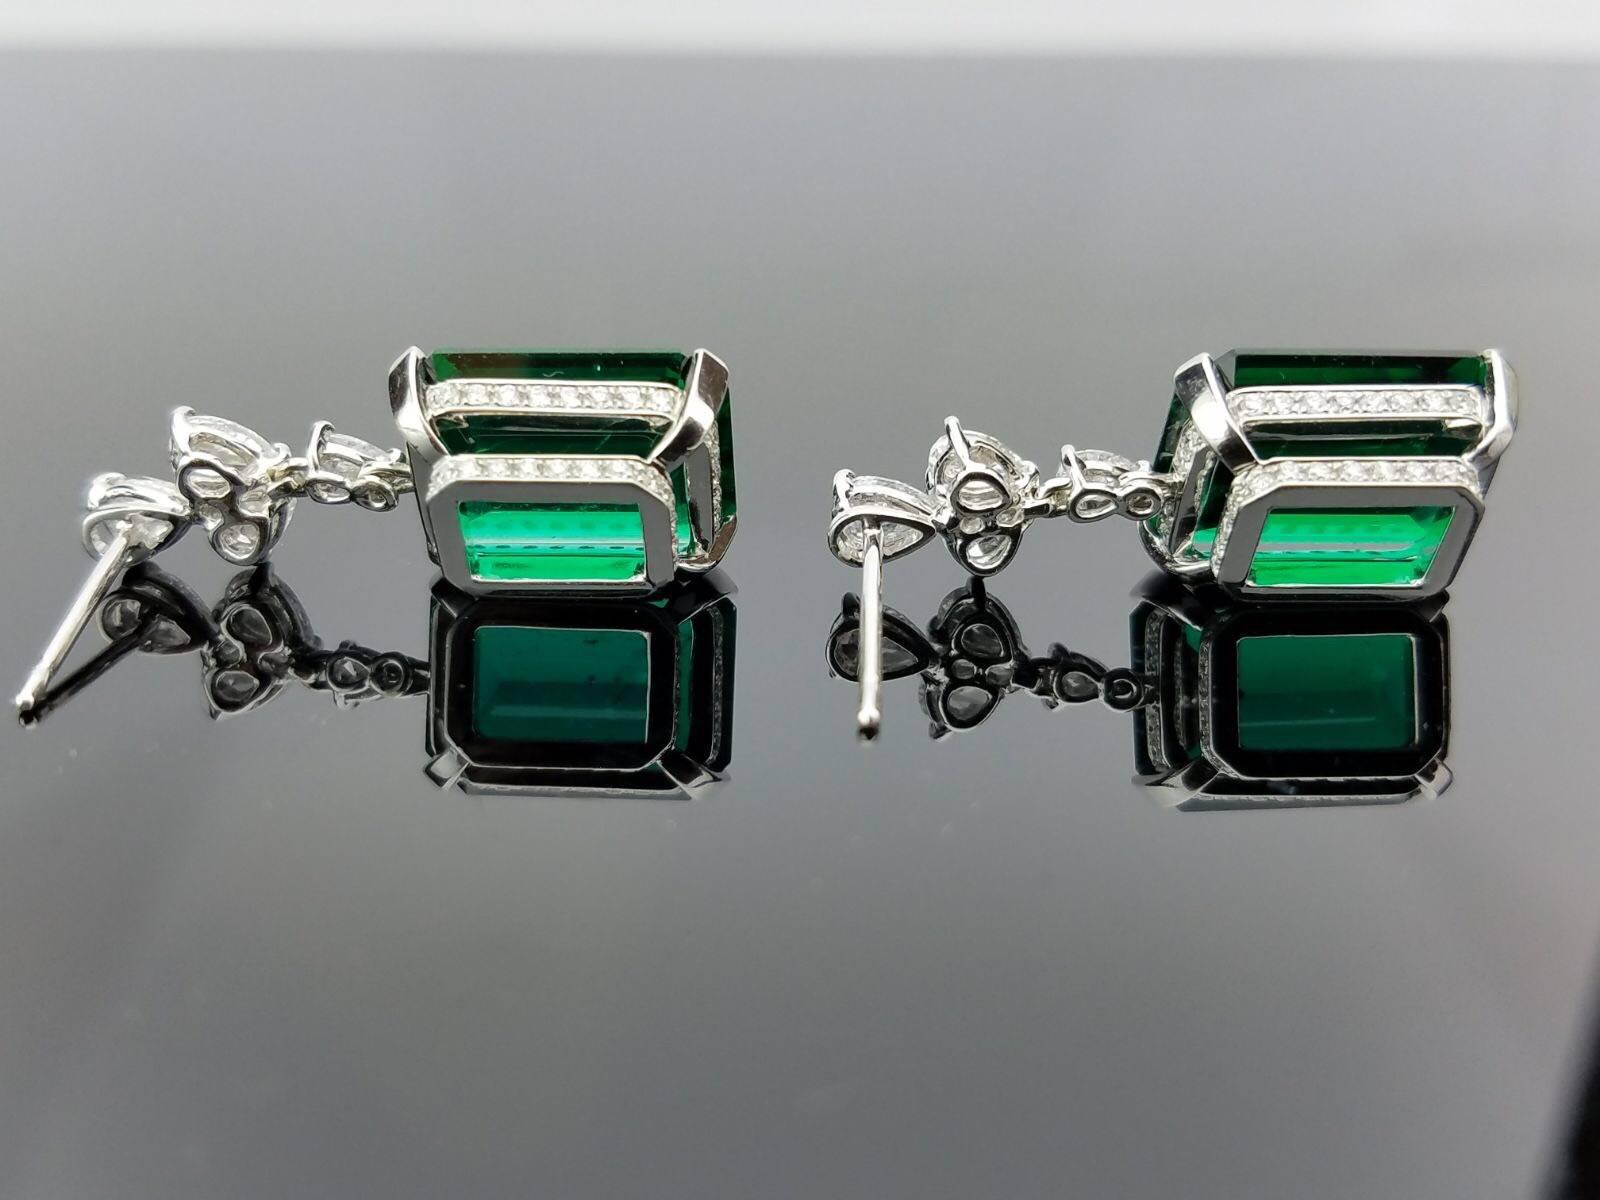 A magnificent pair of fine Emerald earrings (5.98ct, 5.81ct) set in 18K white gold, with very few inclusions in one piece and the other having nearly no inclusions. To find a pair of Emeralds of this size, colour and clarity is very rare. The pair